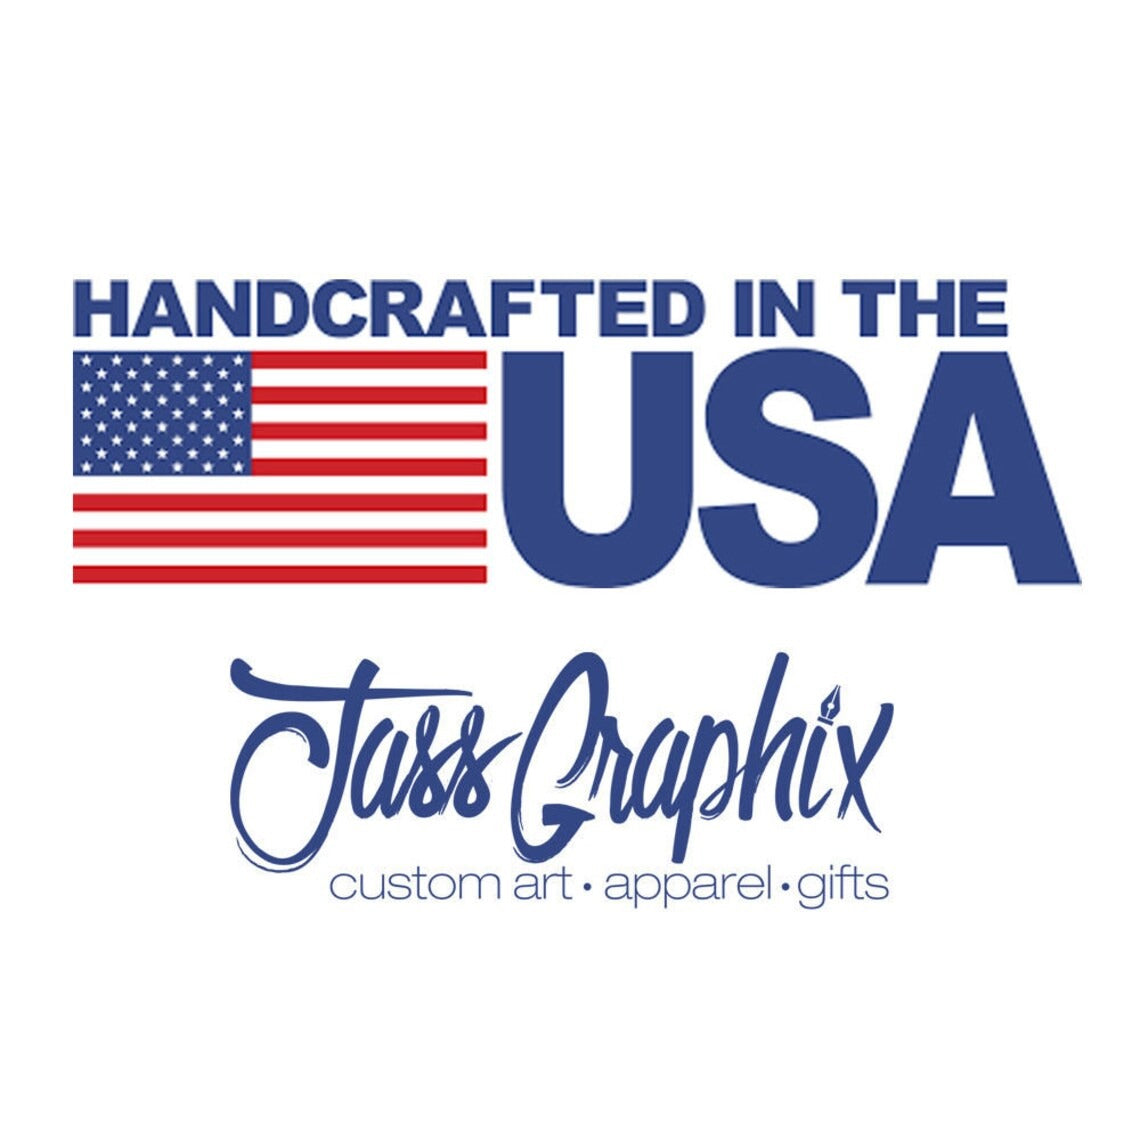 Handcrafted in the USA Logo